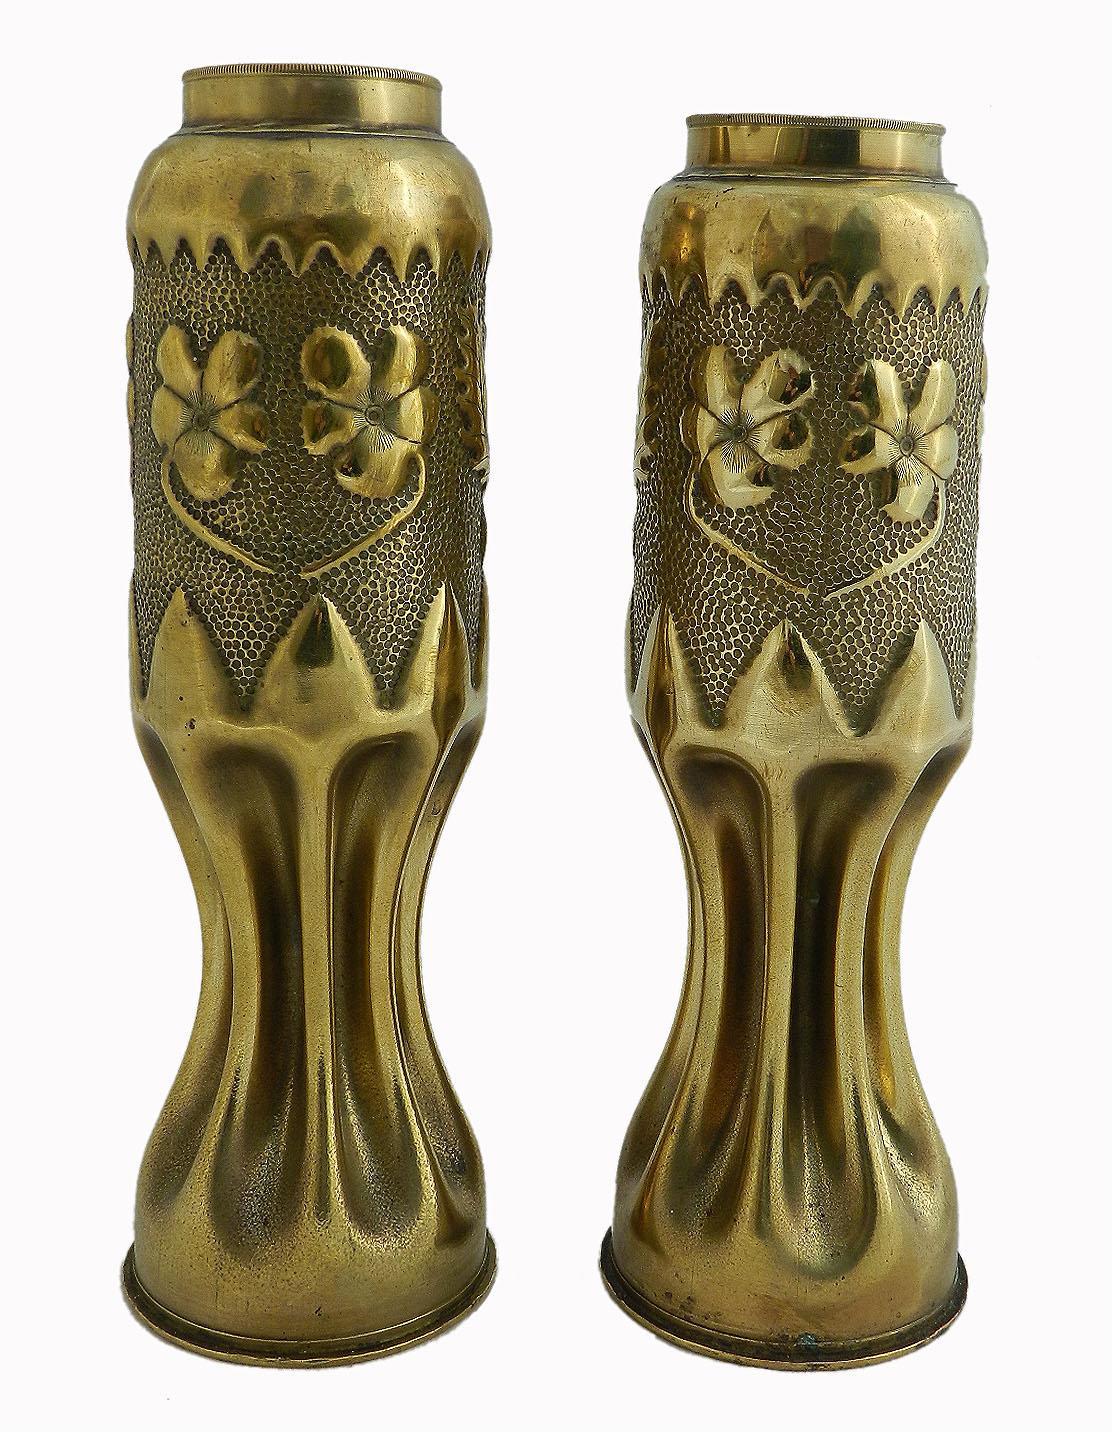 Pair of WWI Trench Art shell cases, French, 1914-1918
Brass ammunition cases modeled as vases
Mementos 
This particularly handsome pair have shields containing initials LM and CM and floral decoration
Very good condition only very minor signs of